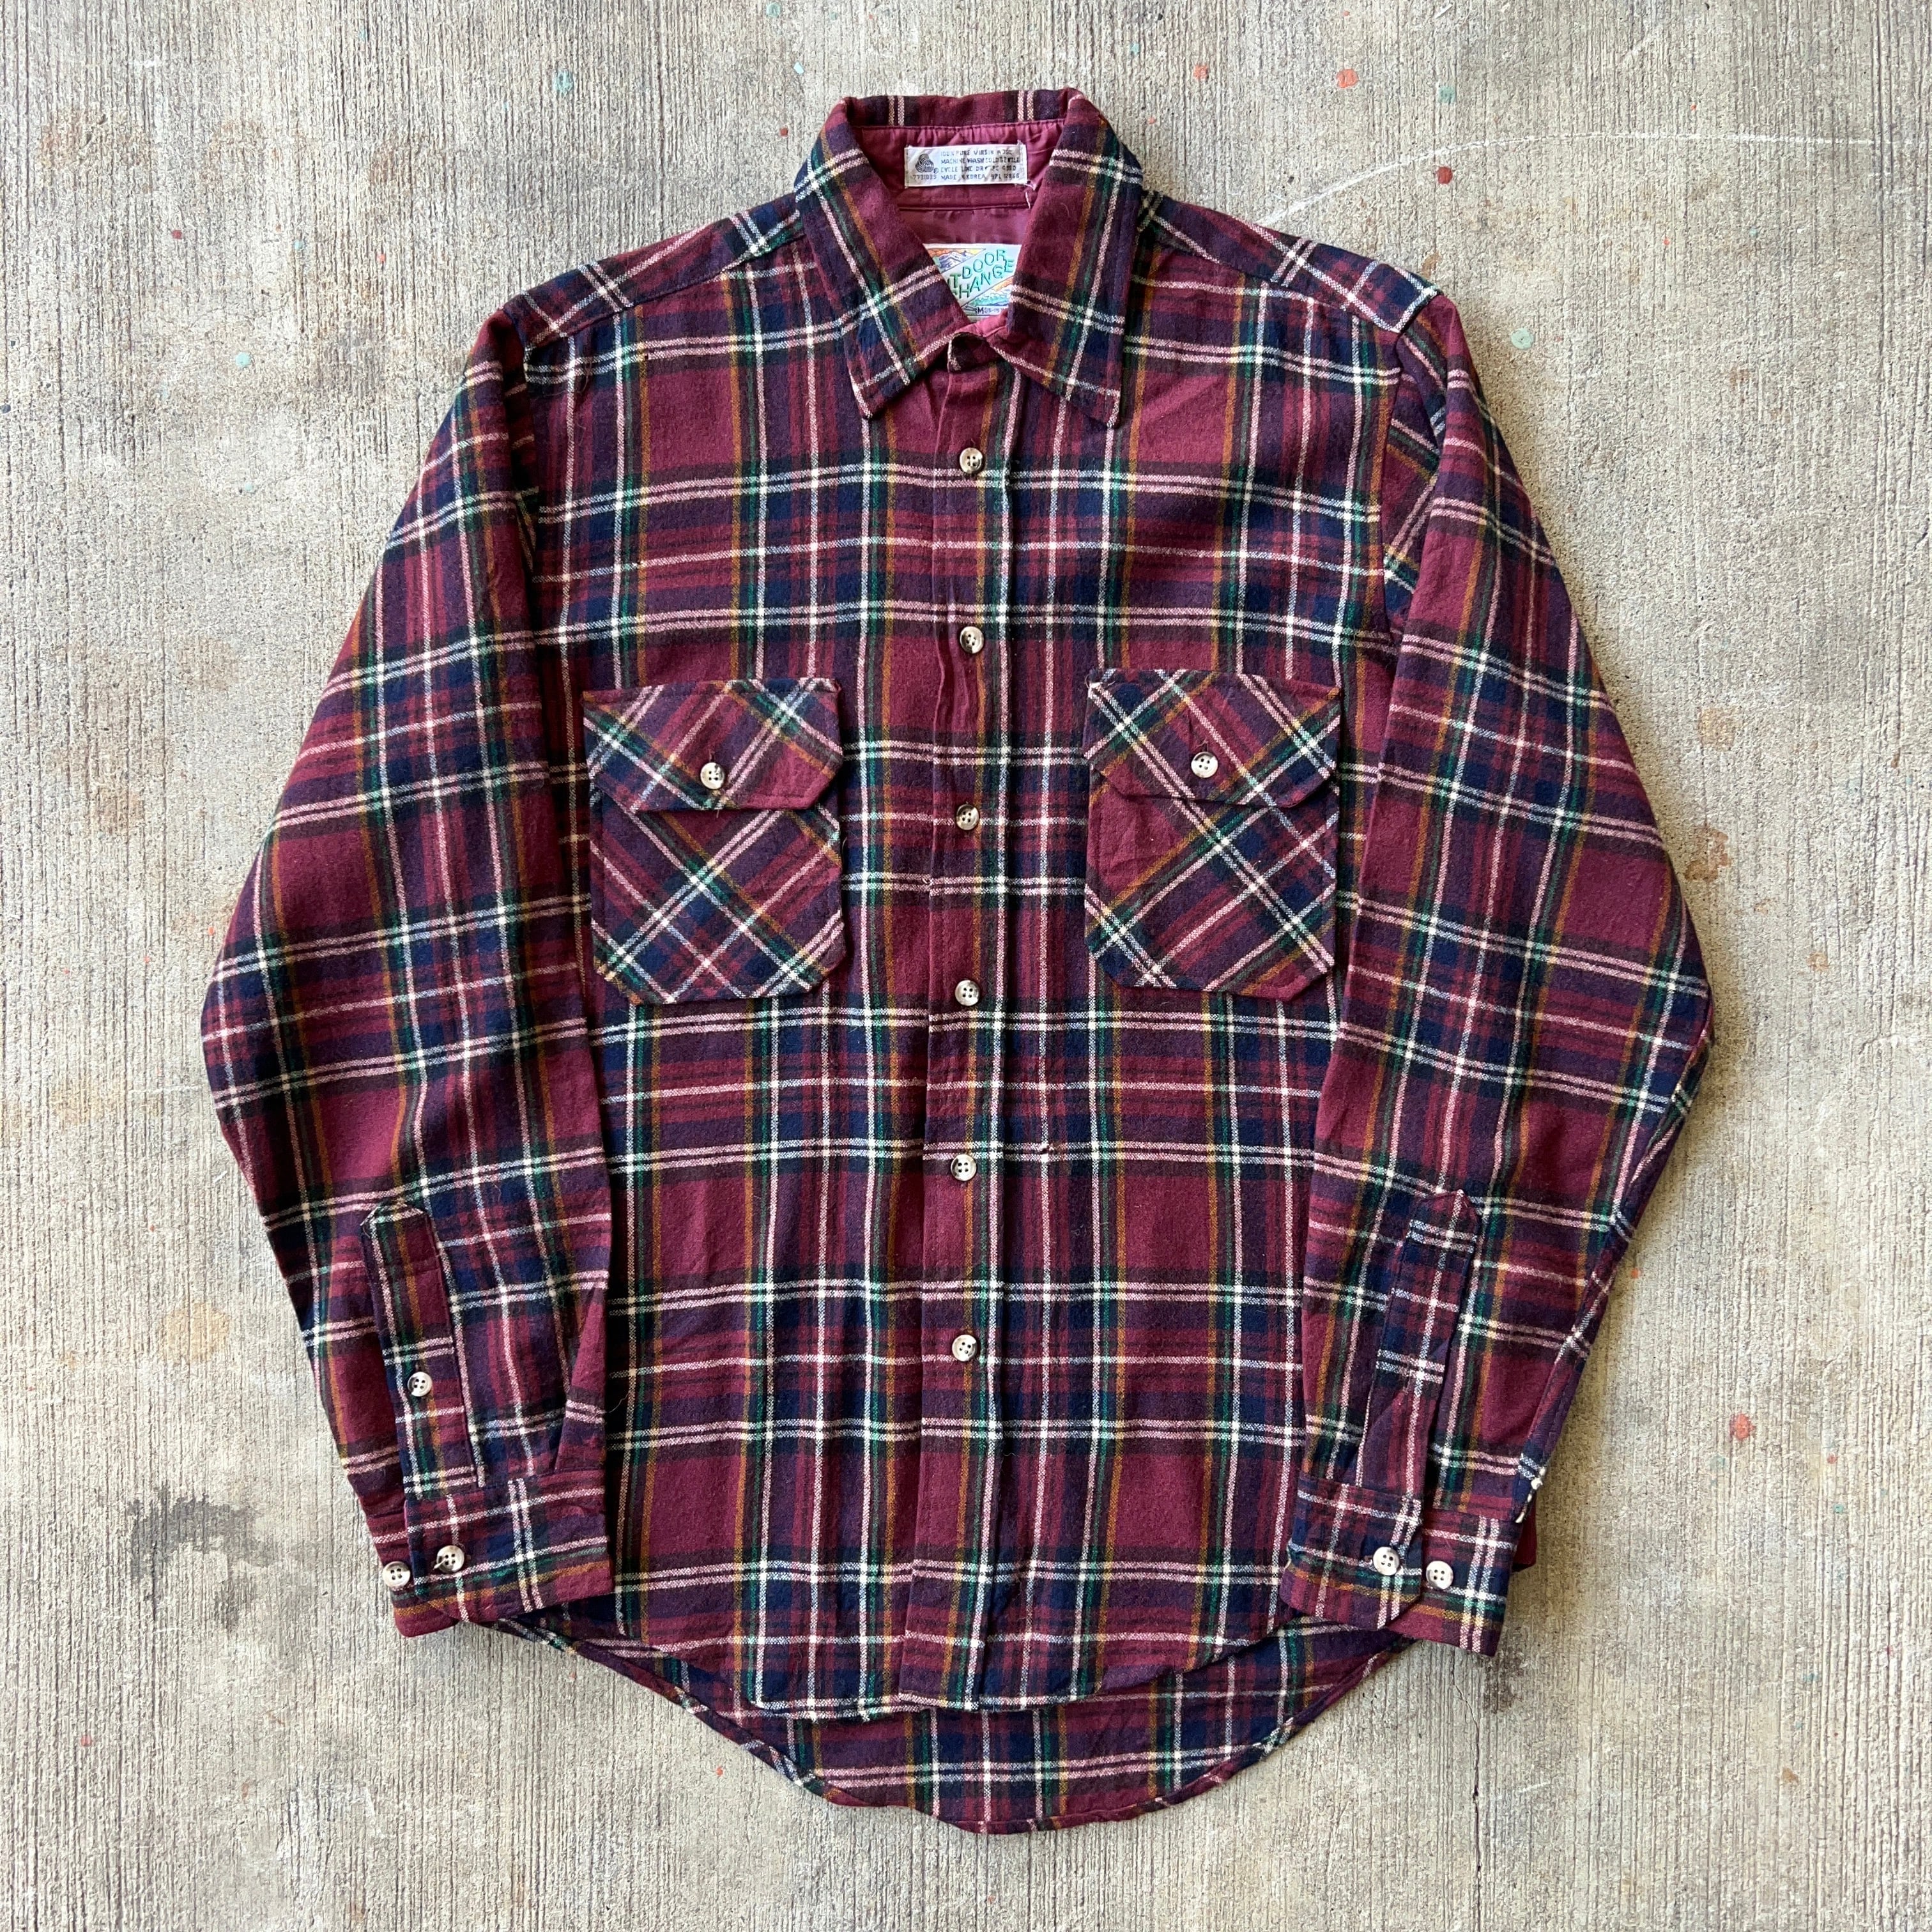 80's~90's “OUTDOOR EXCHANGE” Plaid Wool Shirt SIZE M チェック柄  ウールシャツ【3000円均一商品】【2点以上の購入で1000円OFF】【TH0228】